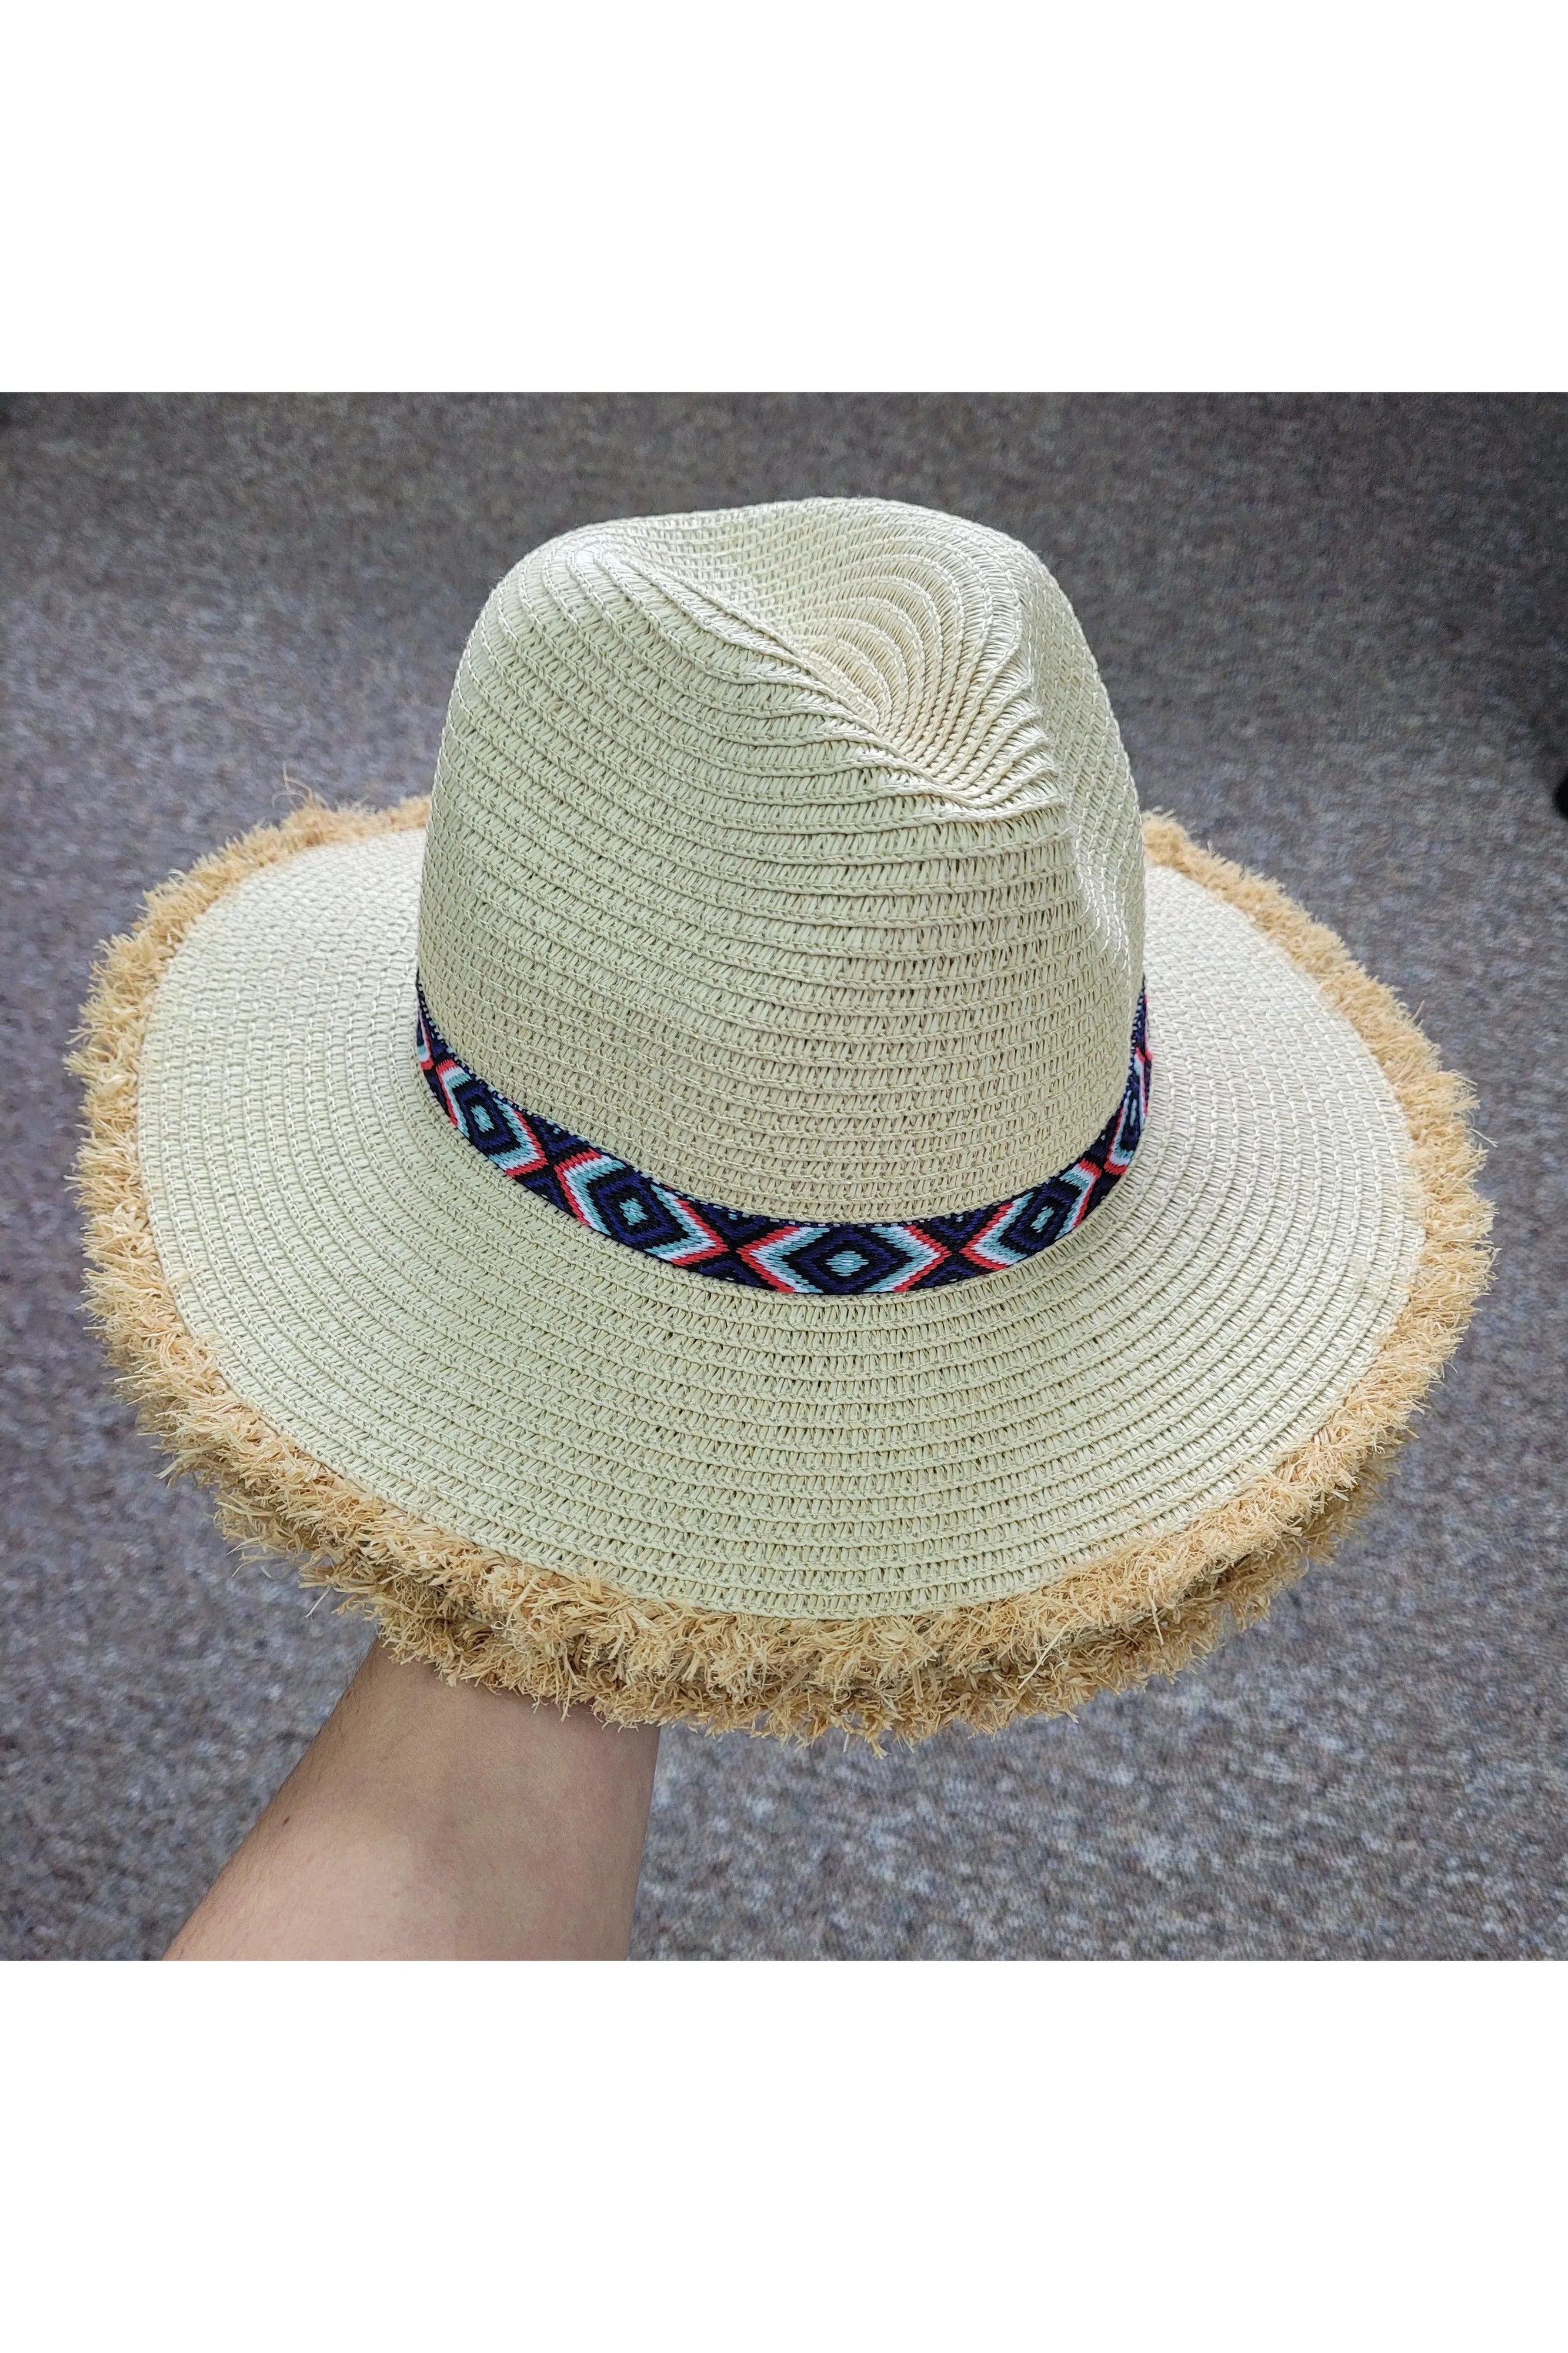 Shop Over My Head Straw Panama Hat-Summer Hat at Ruby Joy Boutique, a Women's Clothing Store in Pickerington, Ohio